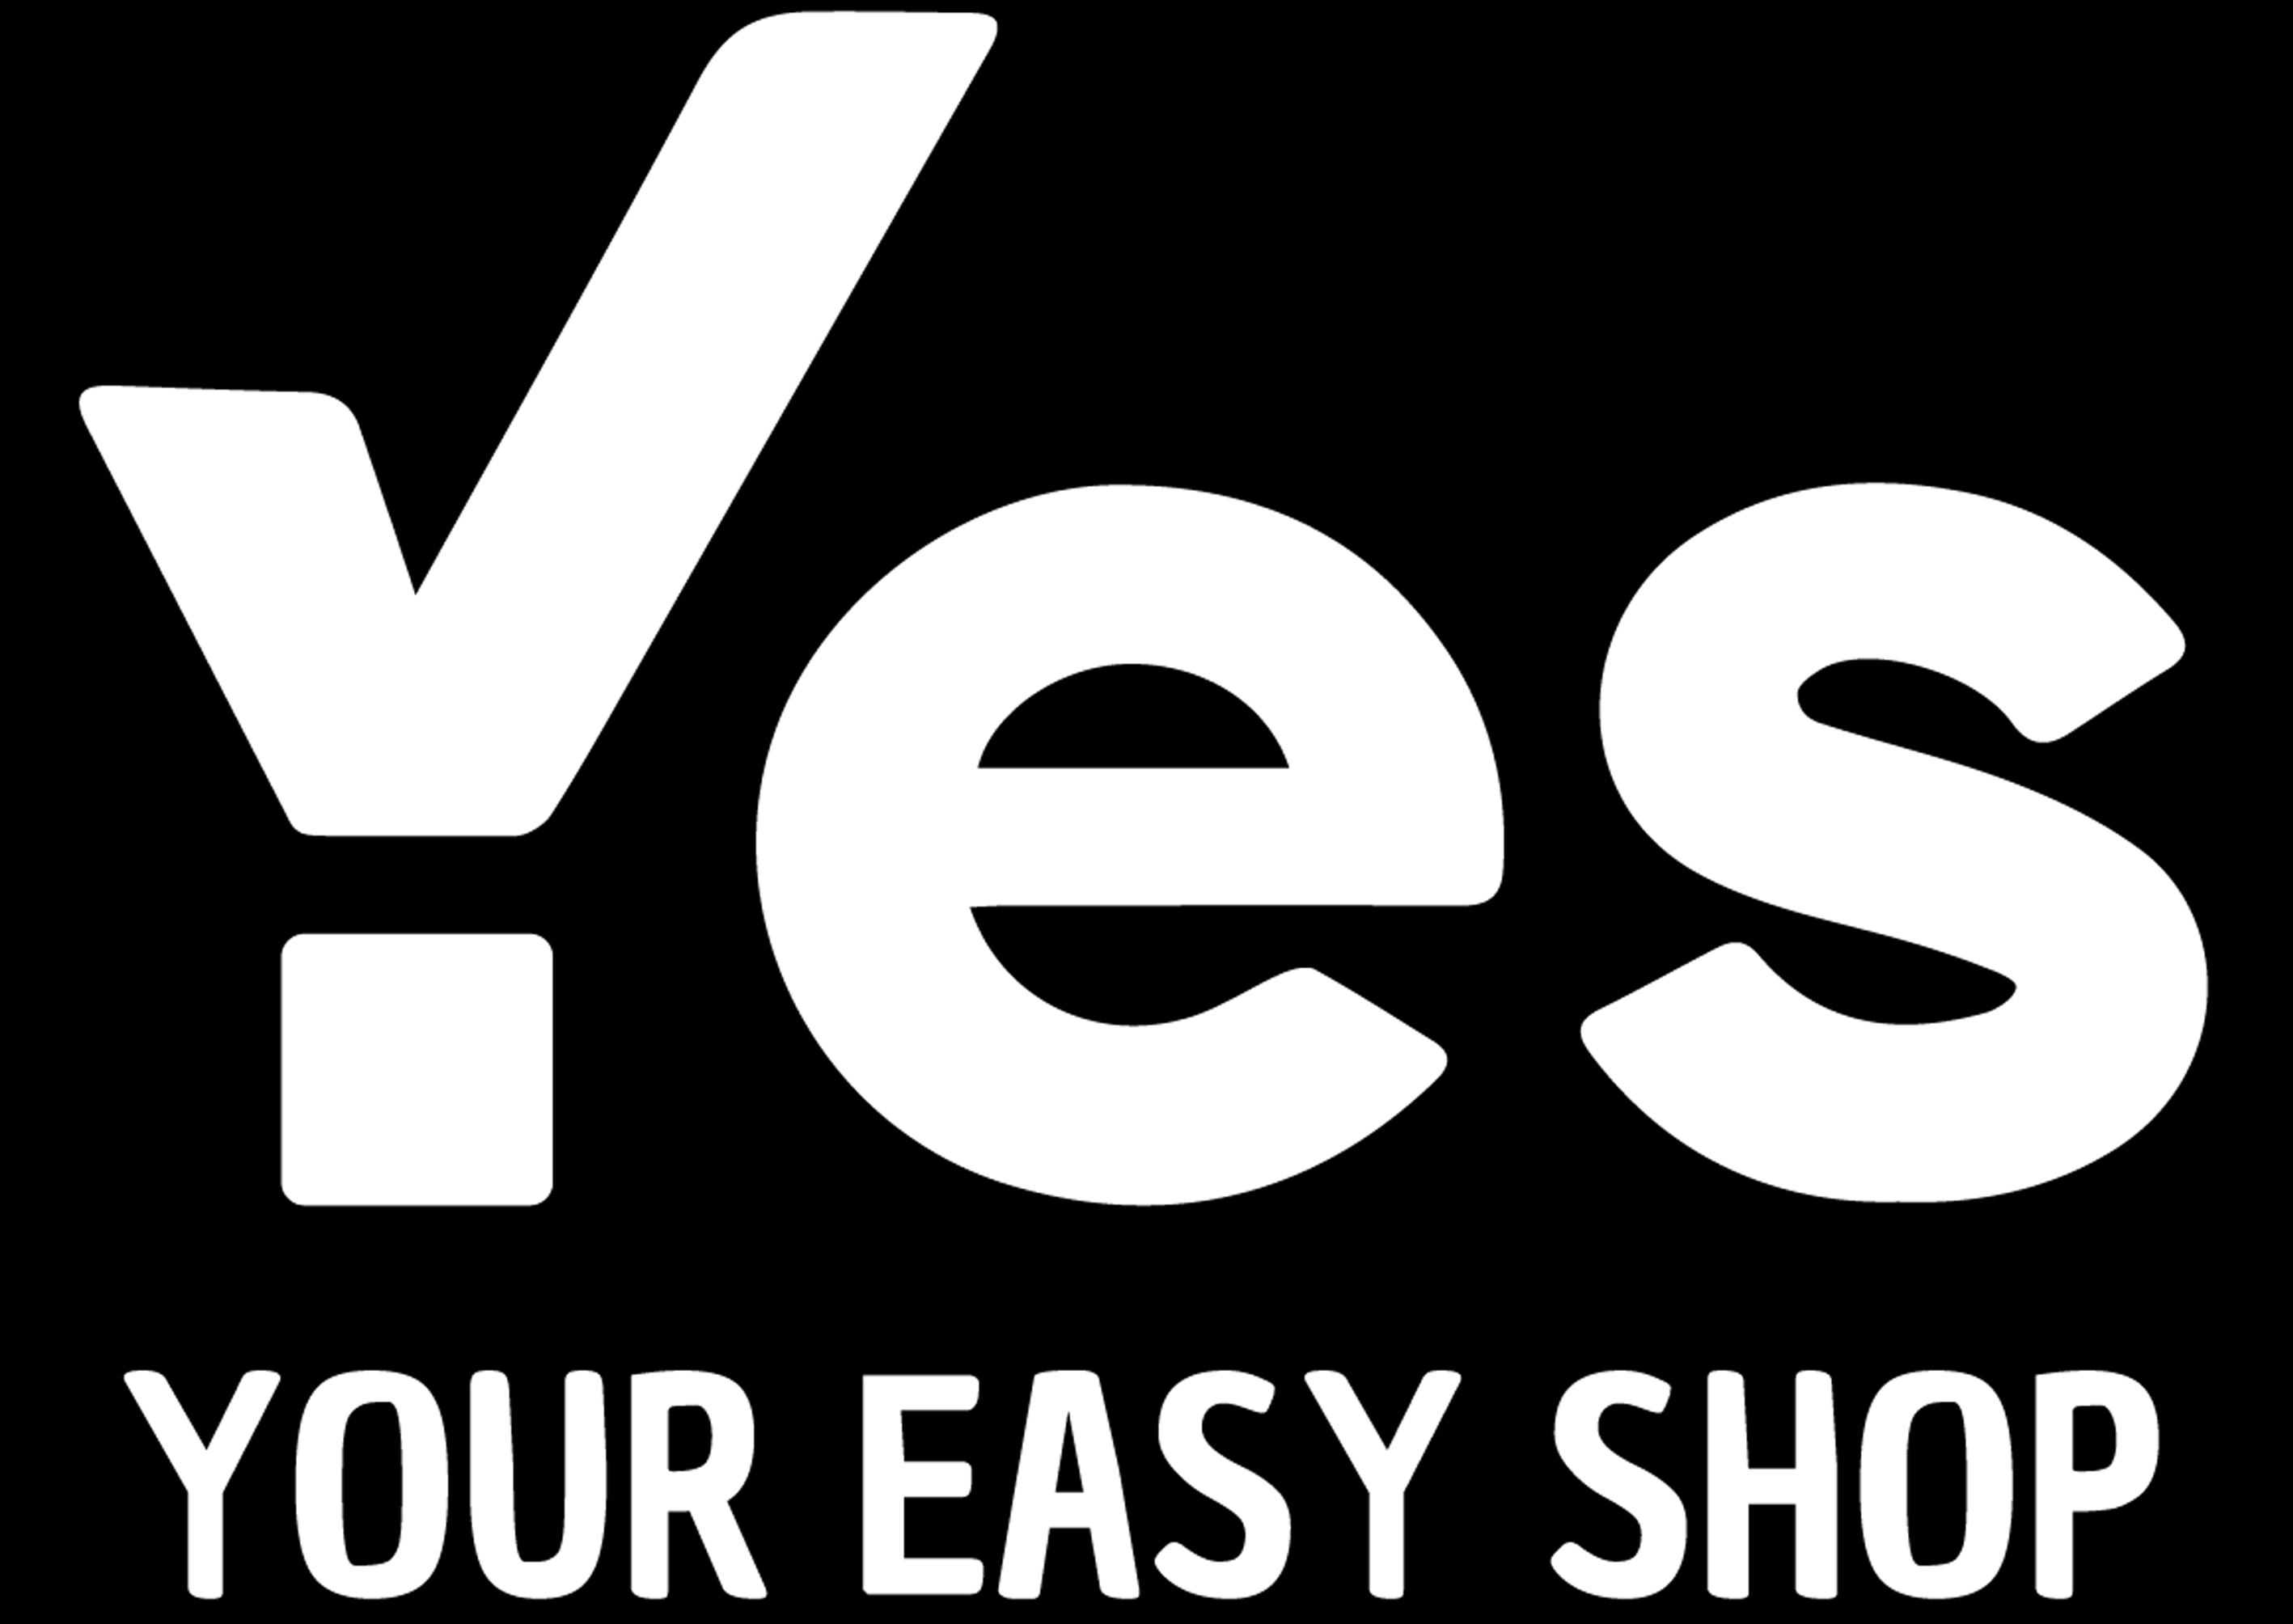 YES - Your Easy Shop - Documentazione